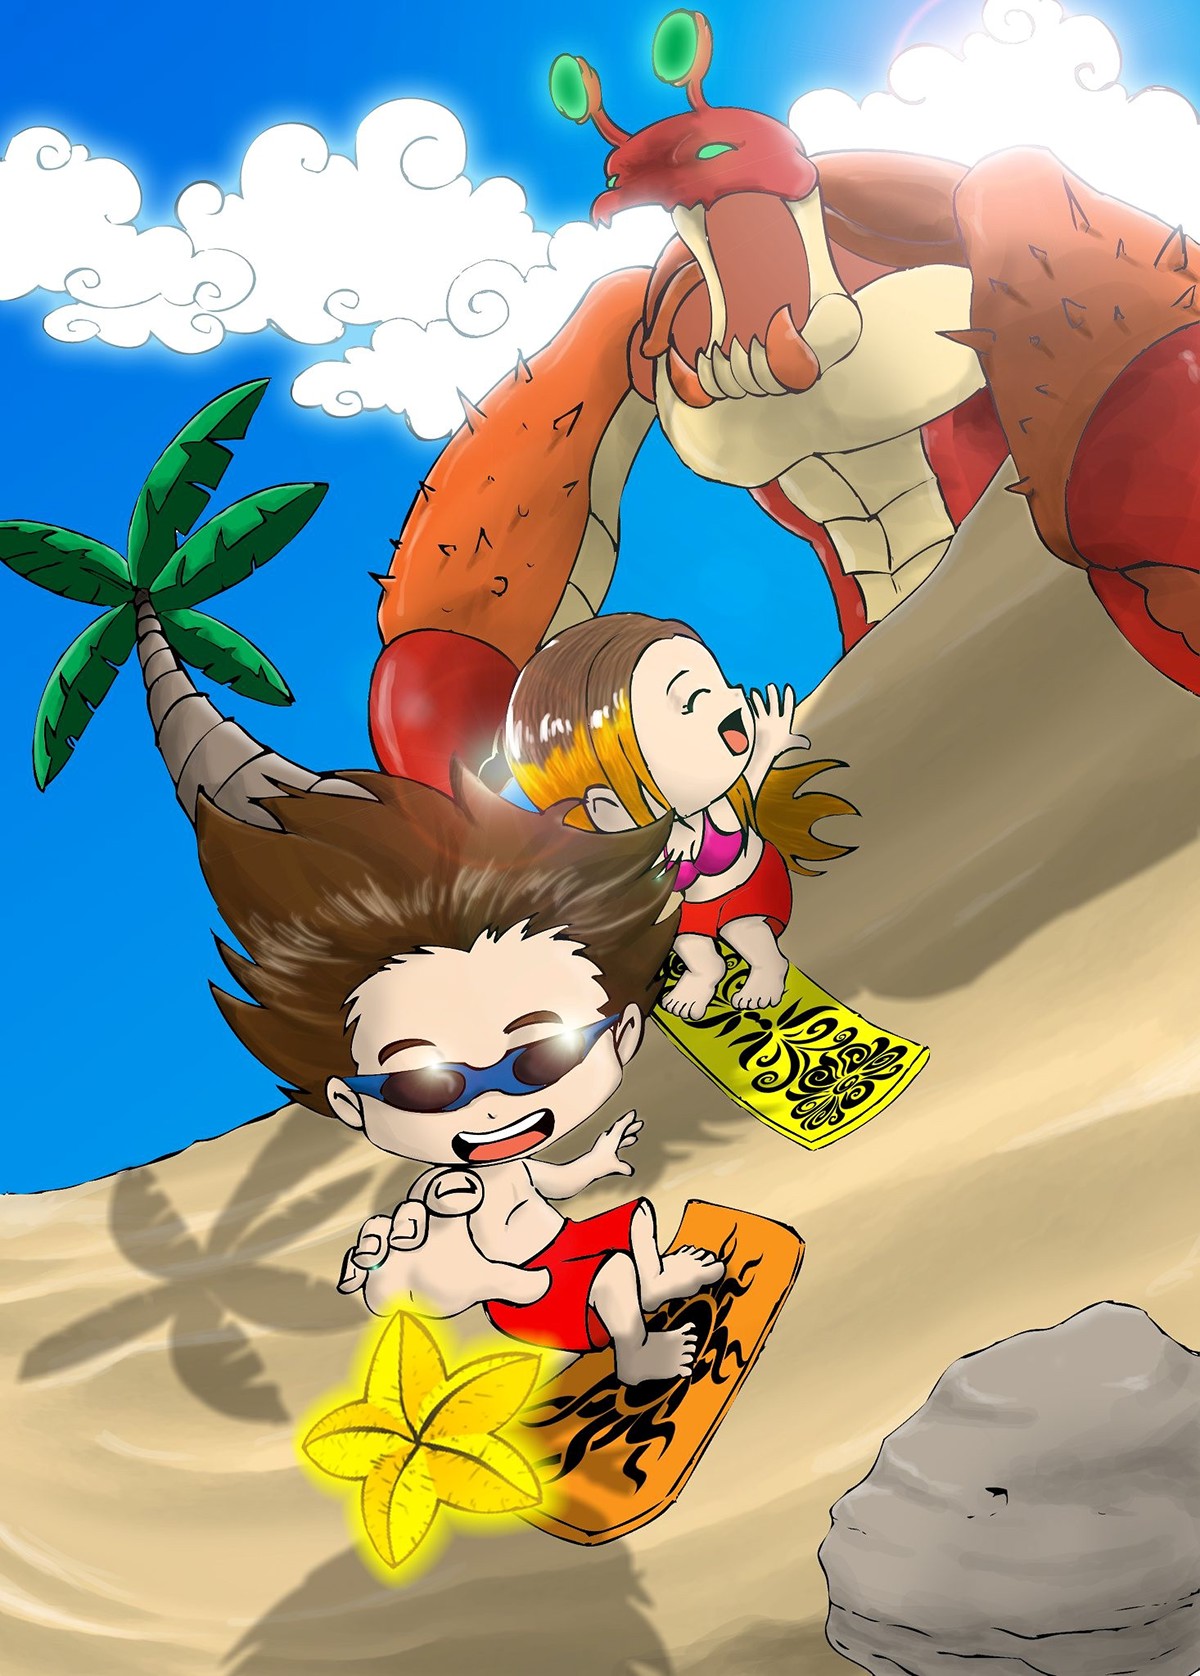 mobilegame game touching screen touch game sandboard sand monster crab Character